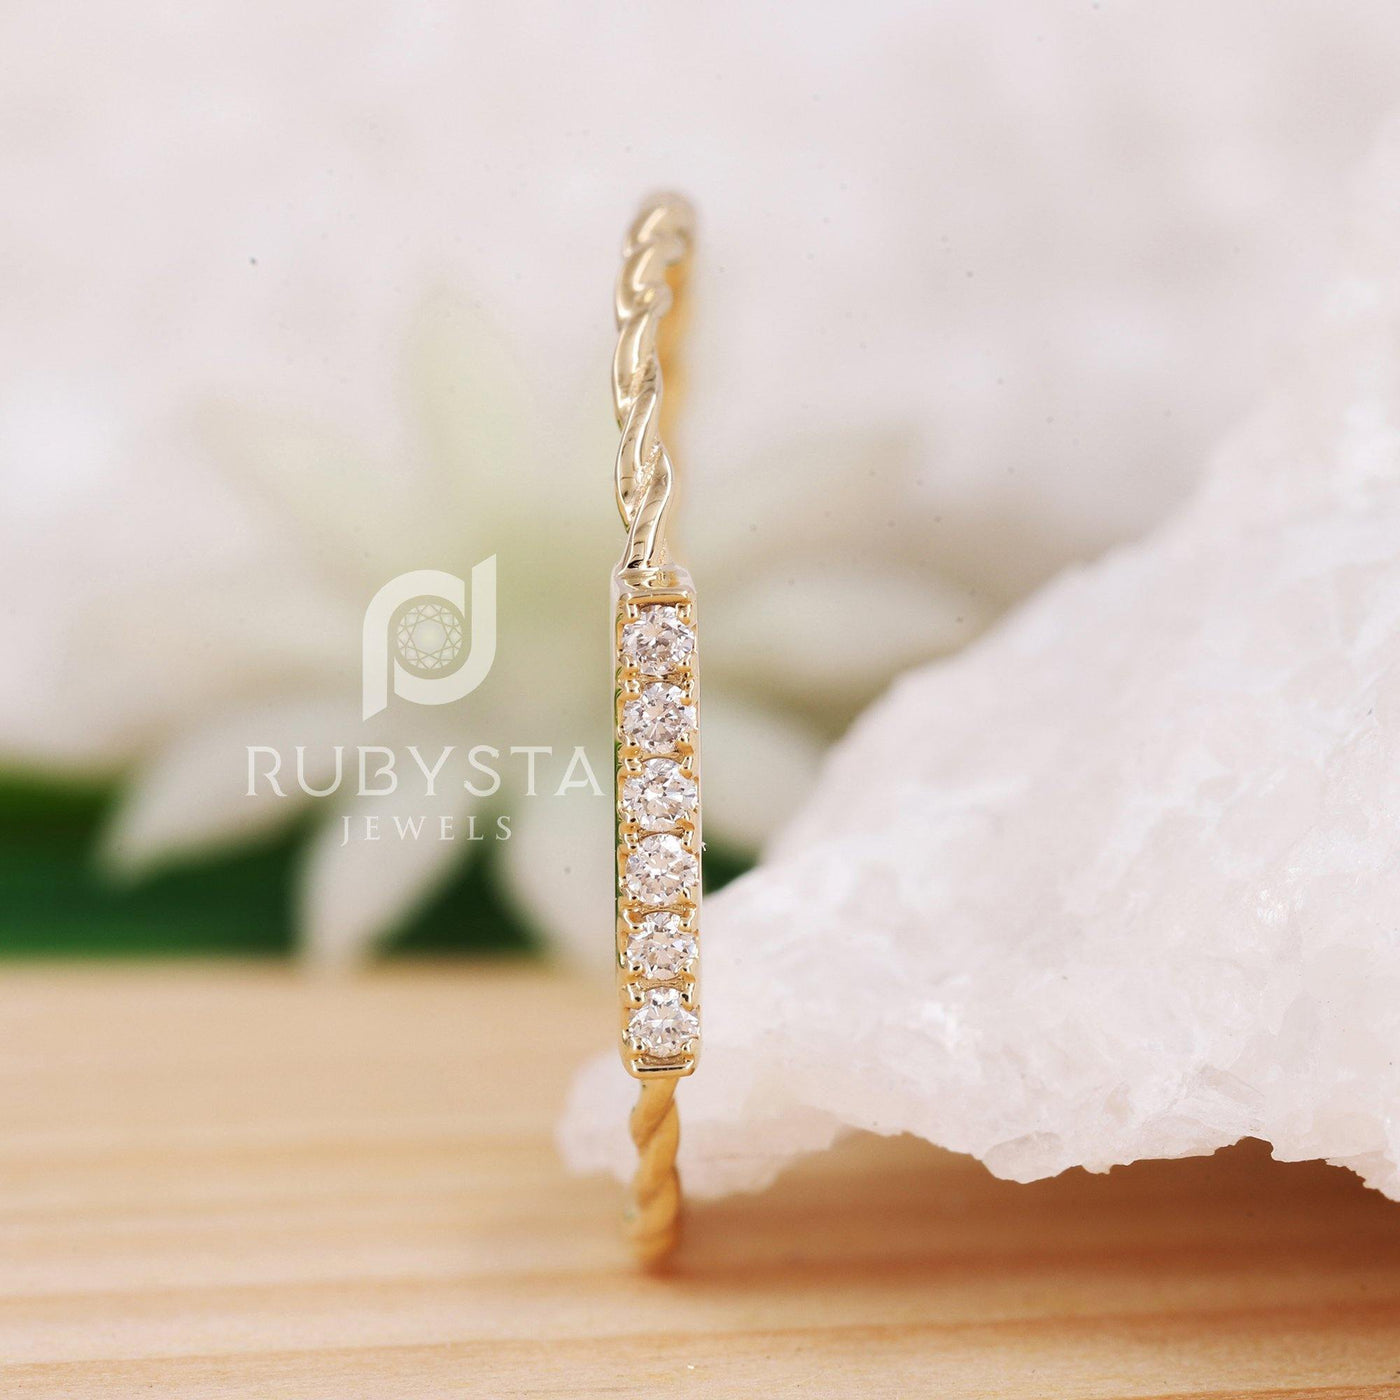 Dainty 6 Diamonds Ring | Delicate Stackable Ring - Rubysta